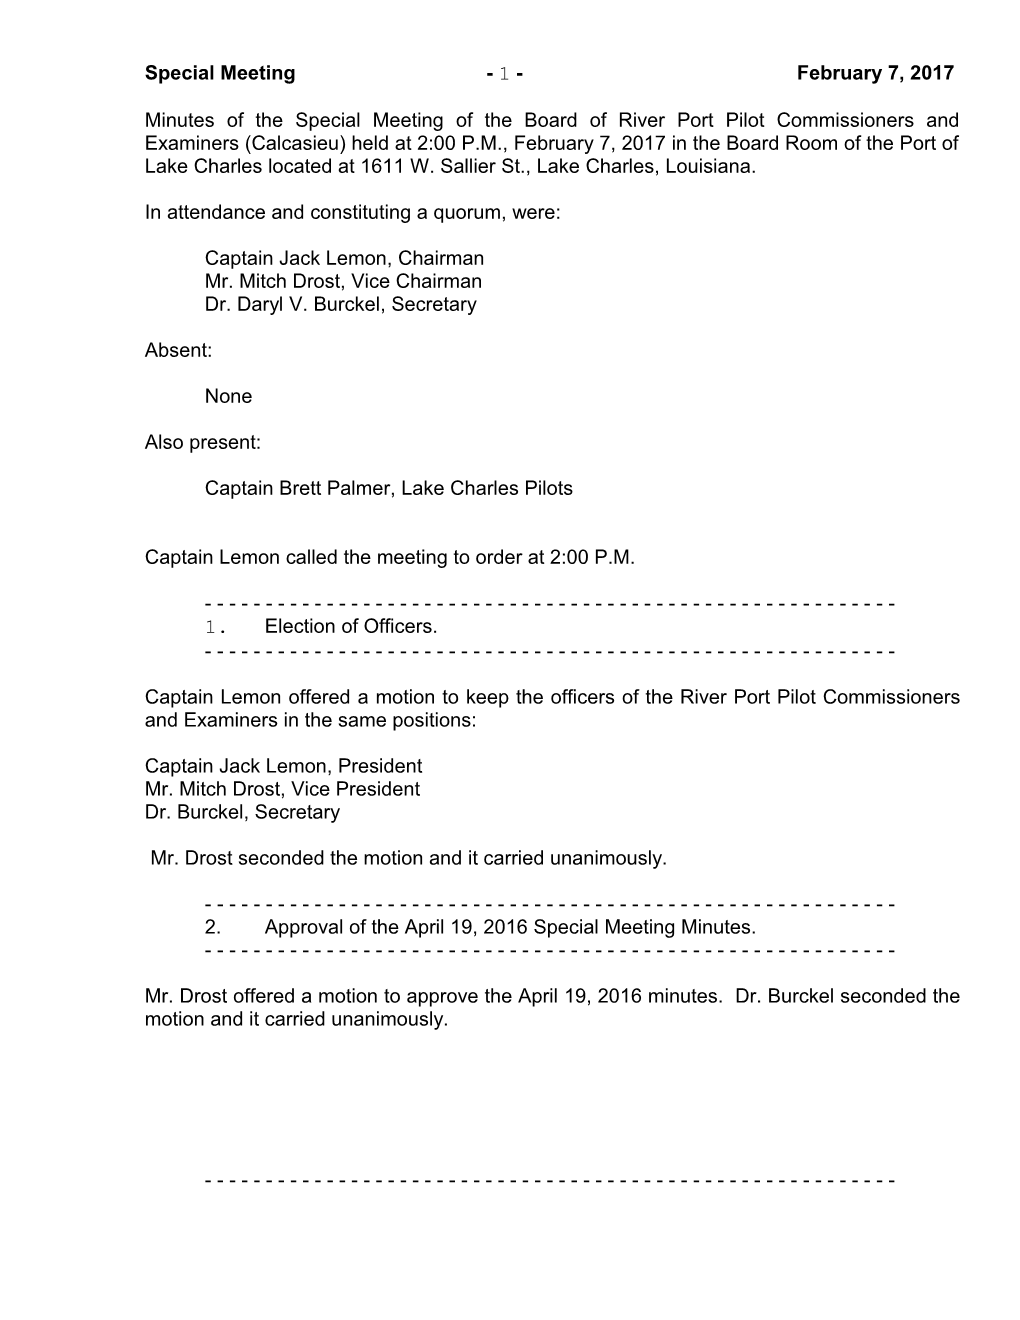 Minutes of the Regular Meeting of the Board River Port Pilot Commissioners and Examiners